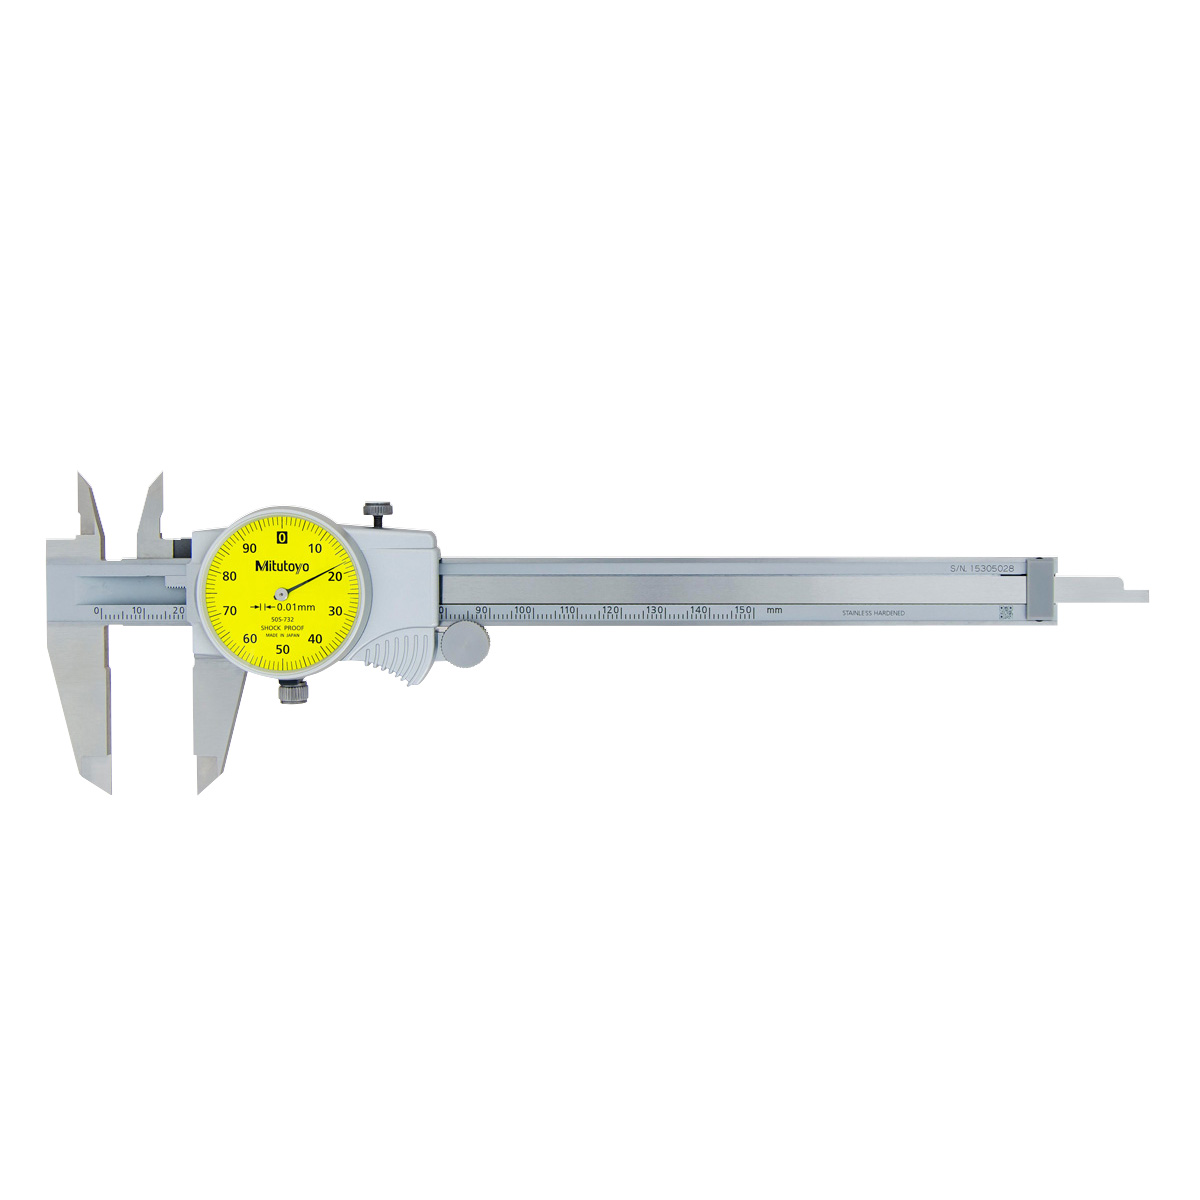 Picture of Mitutoyo 505-732 0-150 mm Dial Caliper with 1 mm Range Revolution